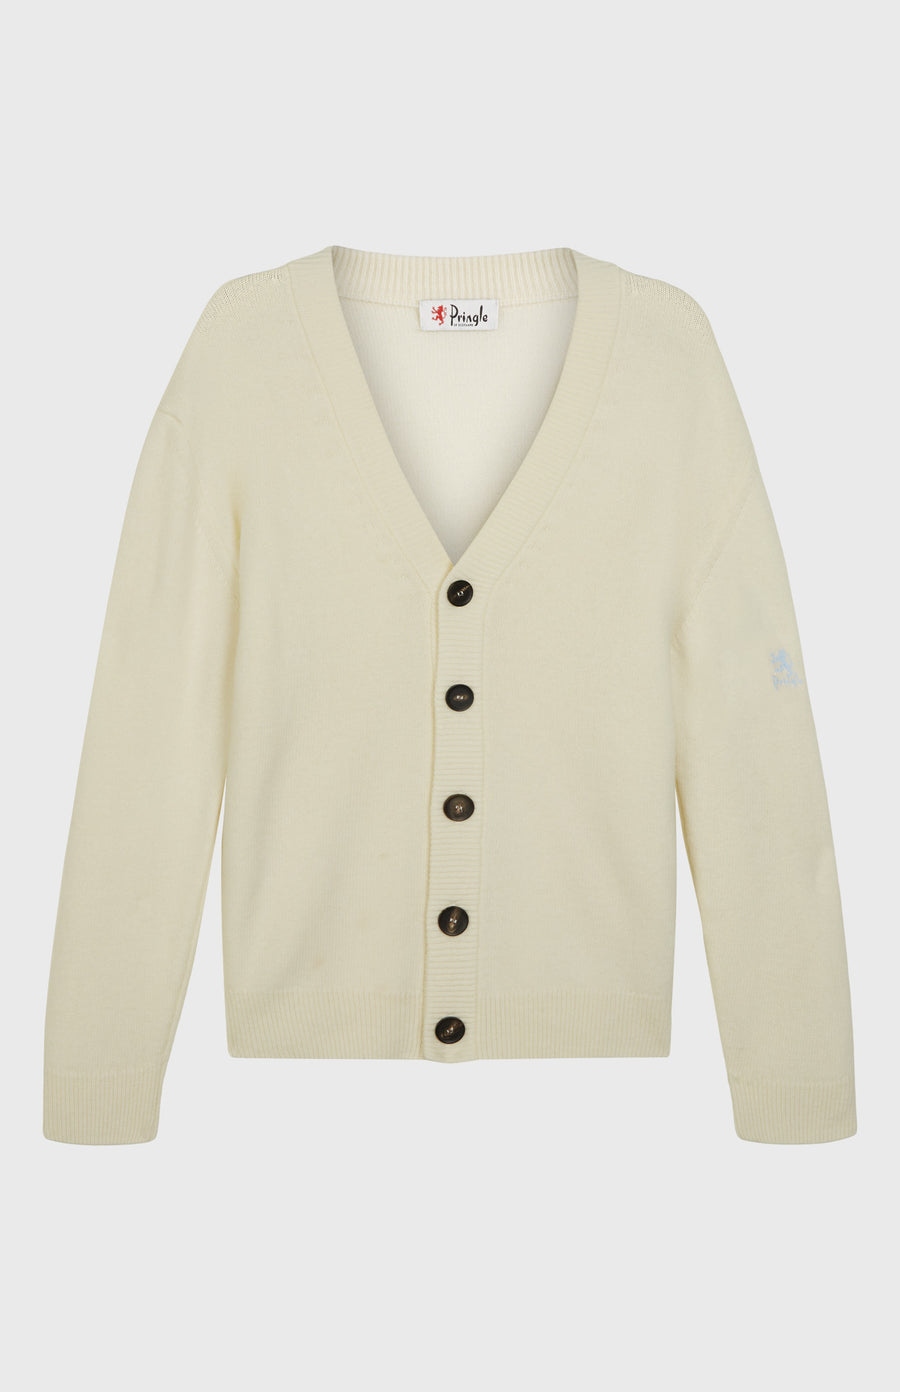 Pringle of Scotland Women's Archive Lambswool Blend Cardigan In Ivory